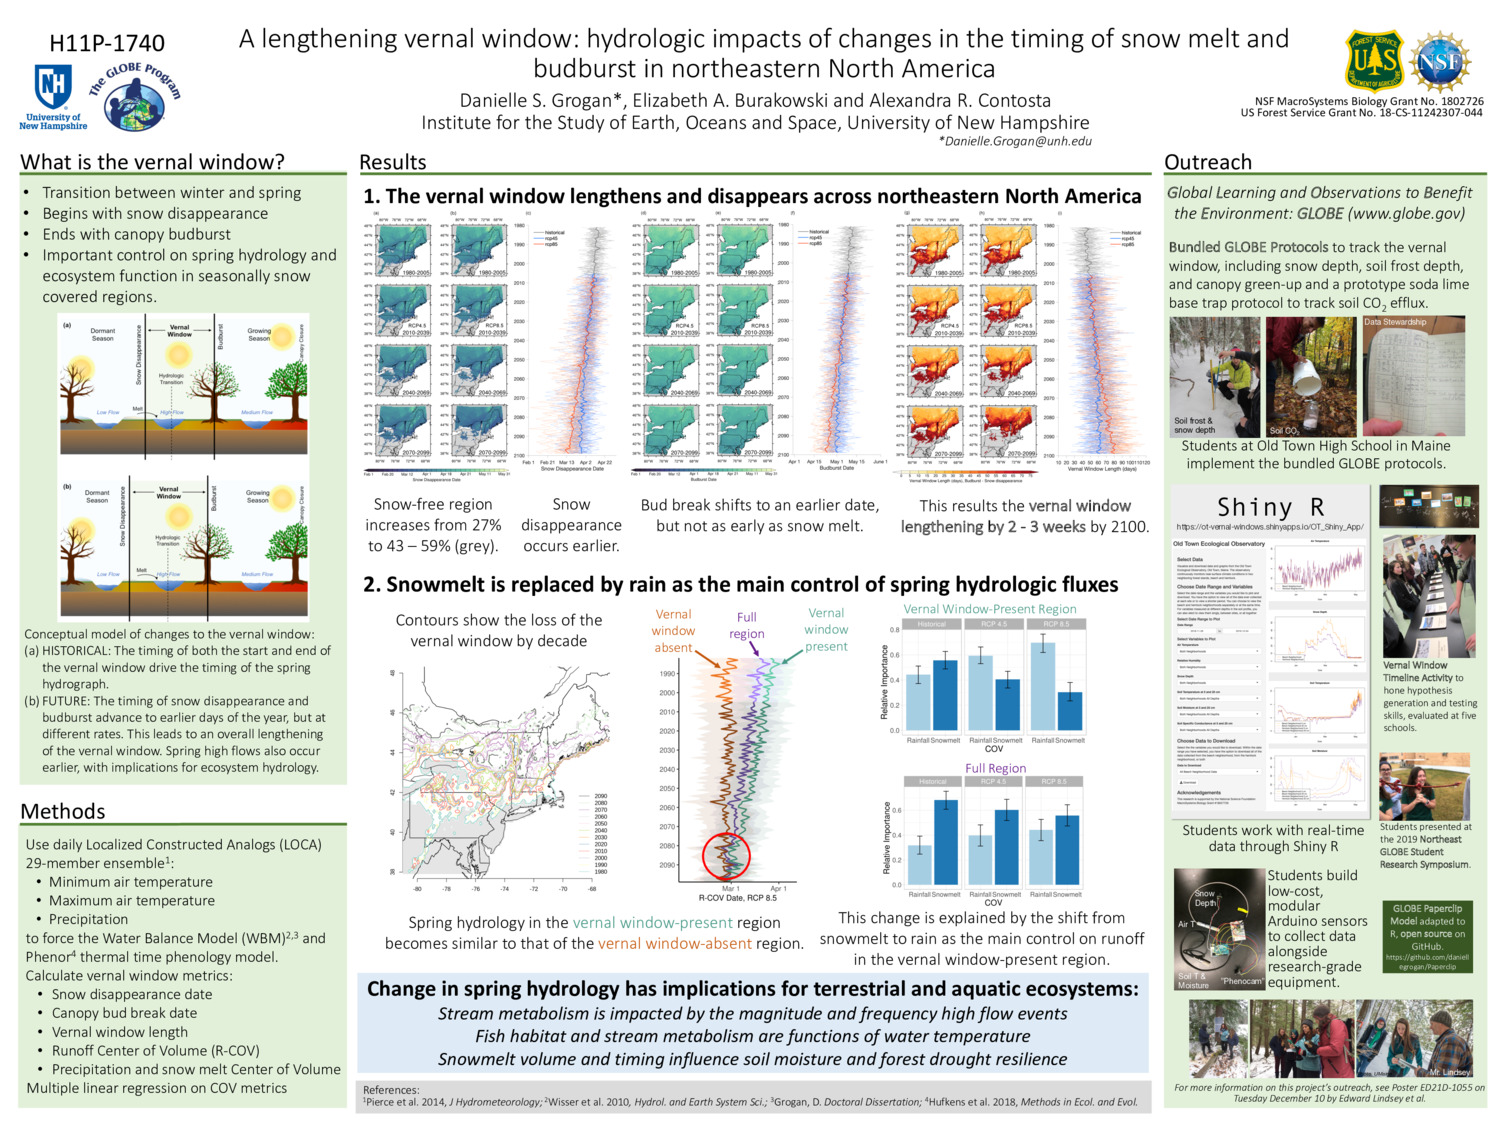 A Lengthening Vernal Window: Hydrologic Impacts Of Changes In The Timing Of Snow Melt And Budburst In Northeastern North America by dgrogan